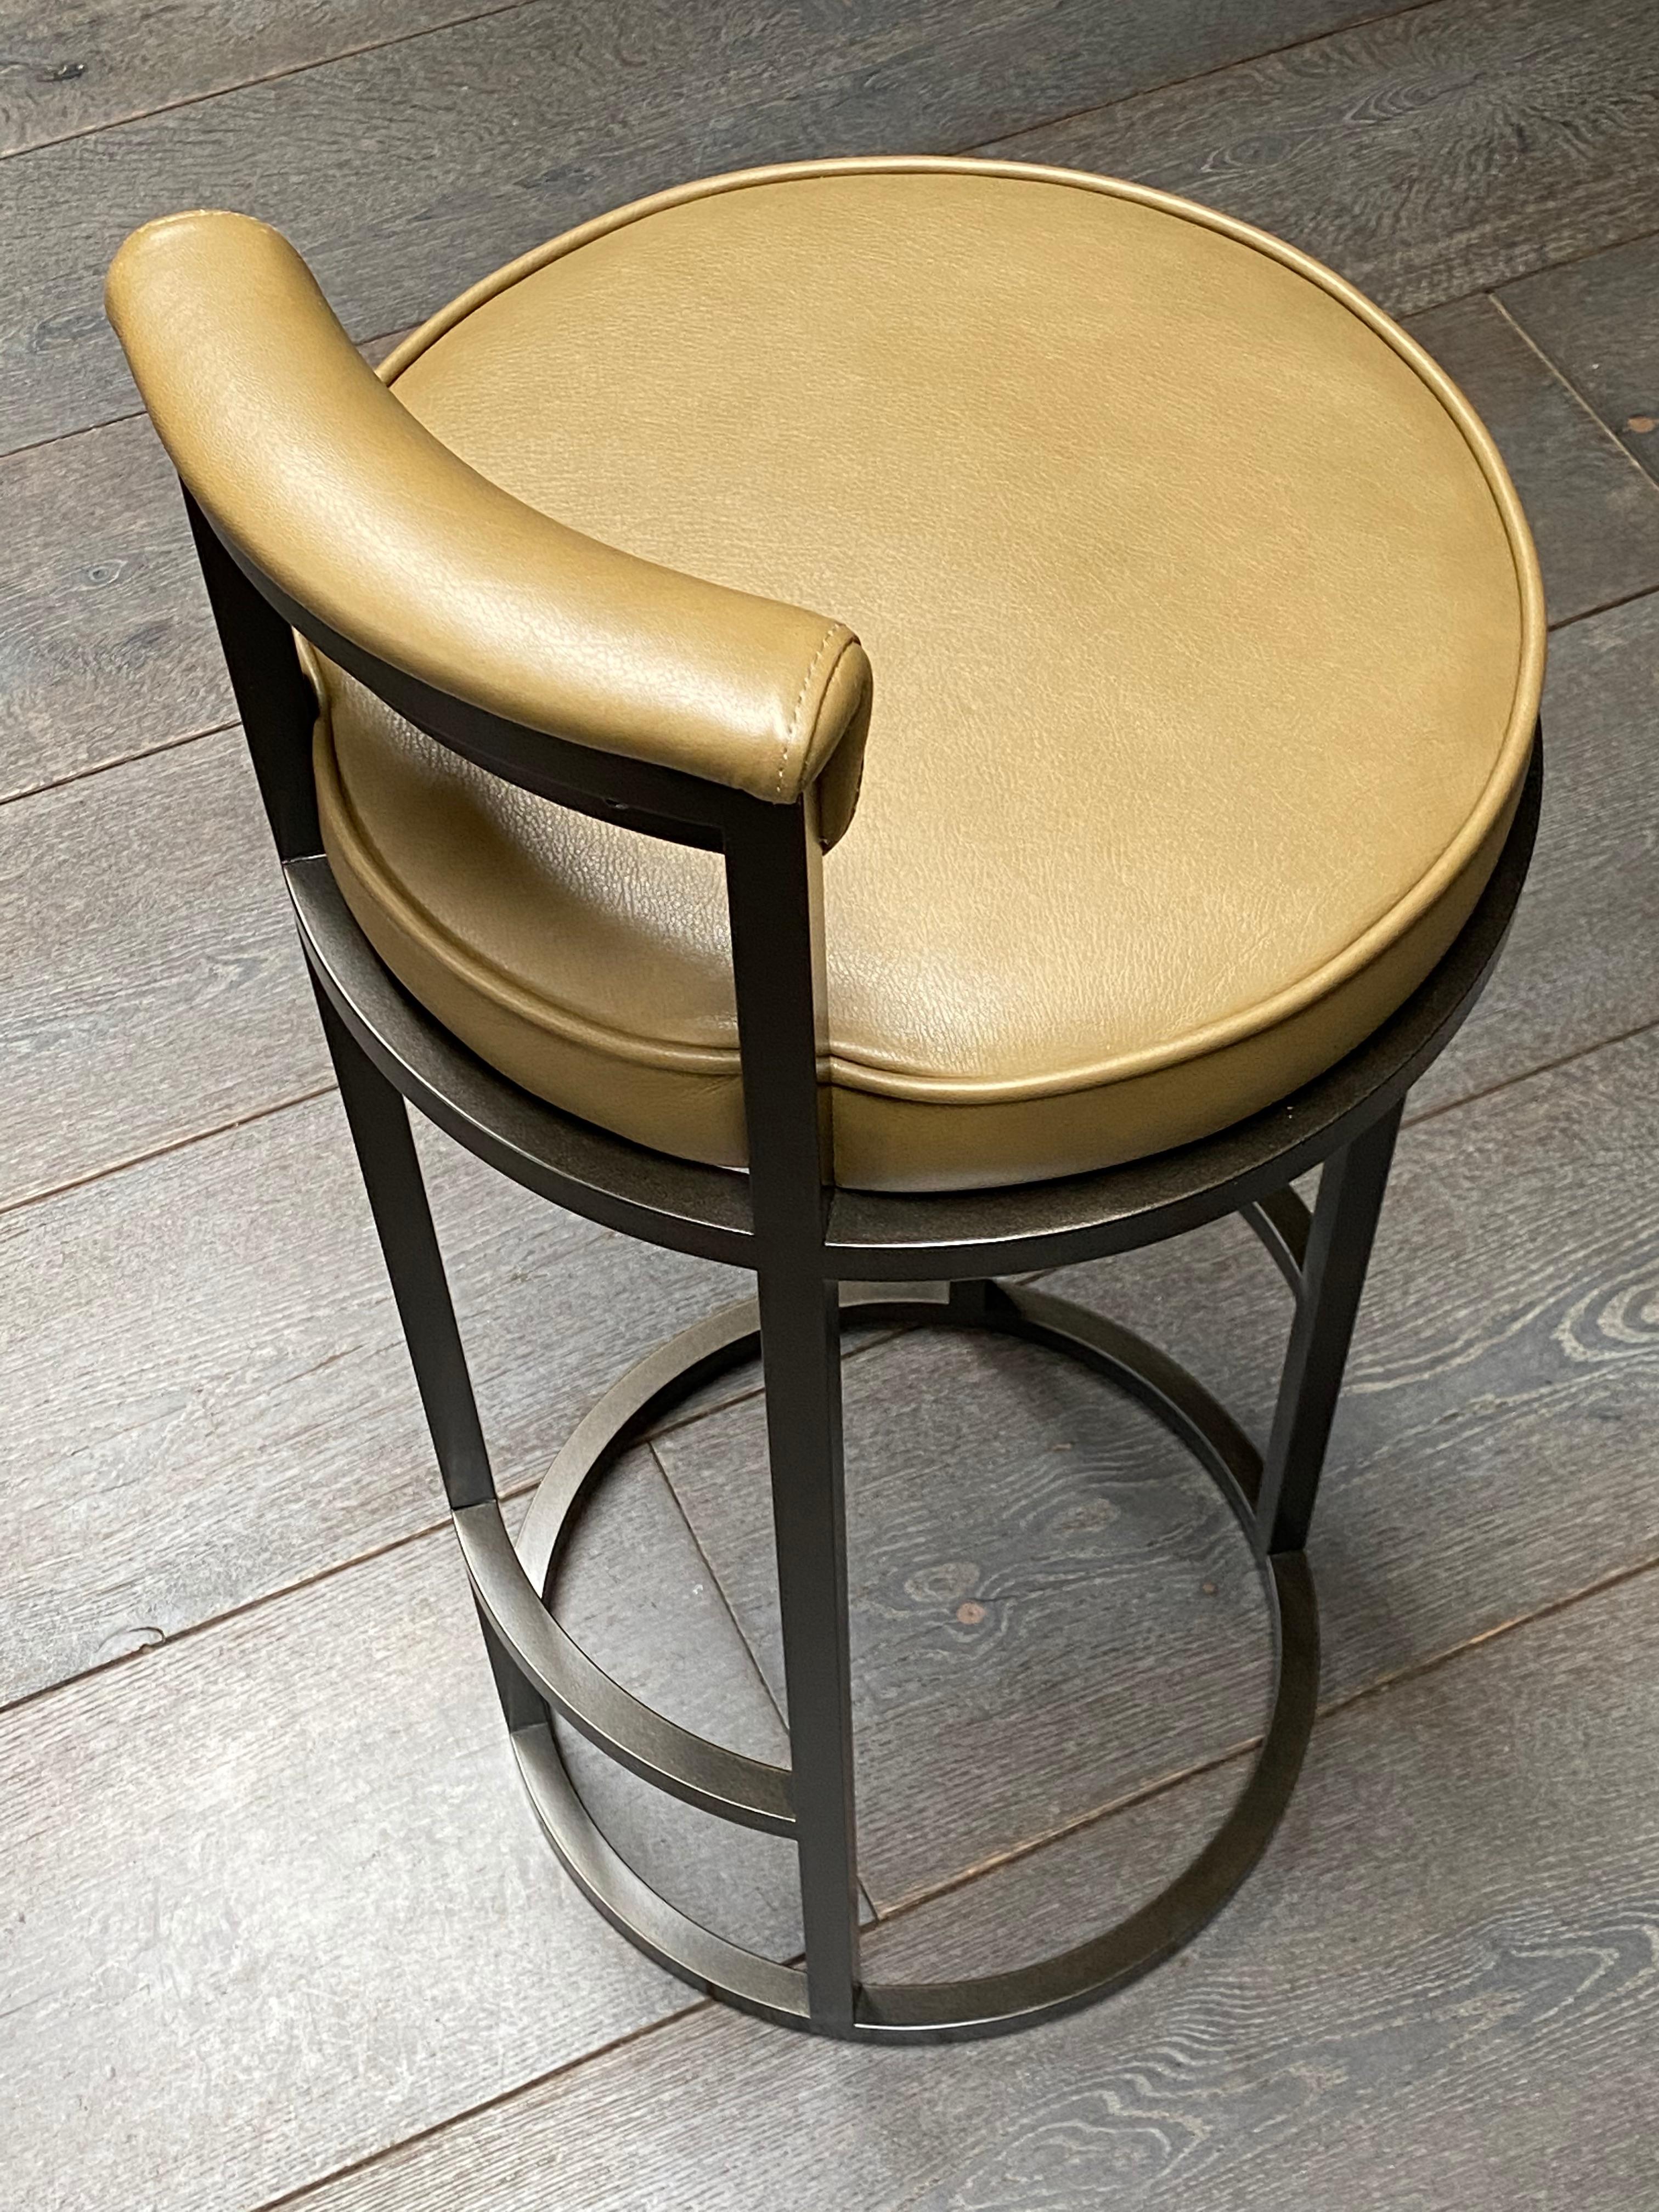 Ultrasuede Diana Bar Stool Circular with Back Rest in Steel Powder-Coated & Mousse Leather For Sale